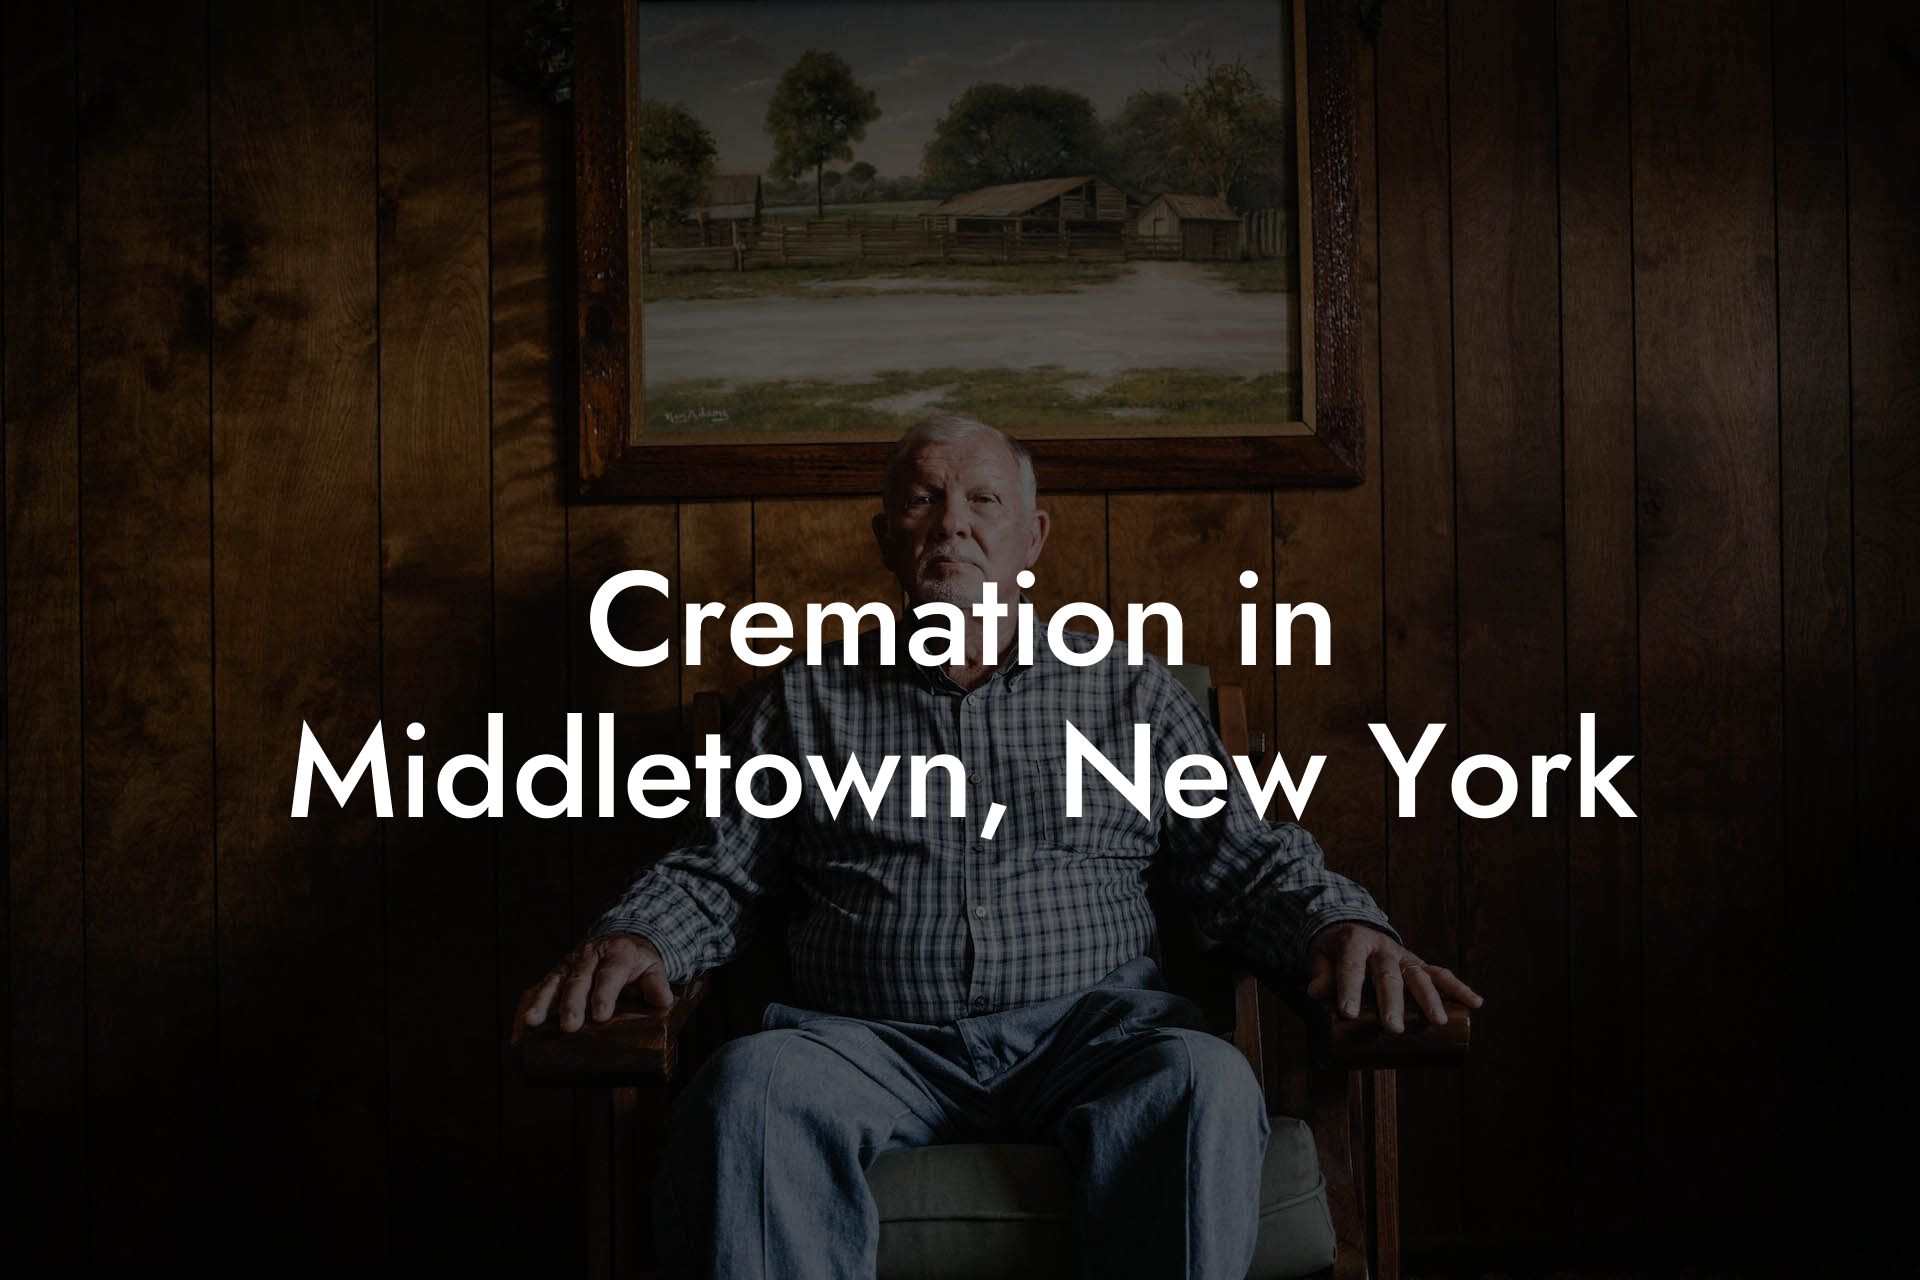 Cremation in Middletown, New York